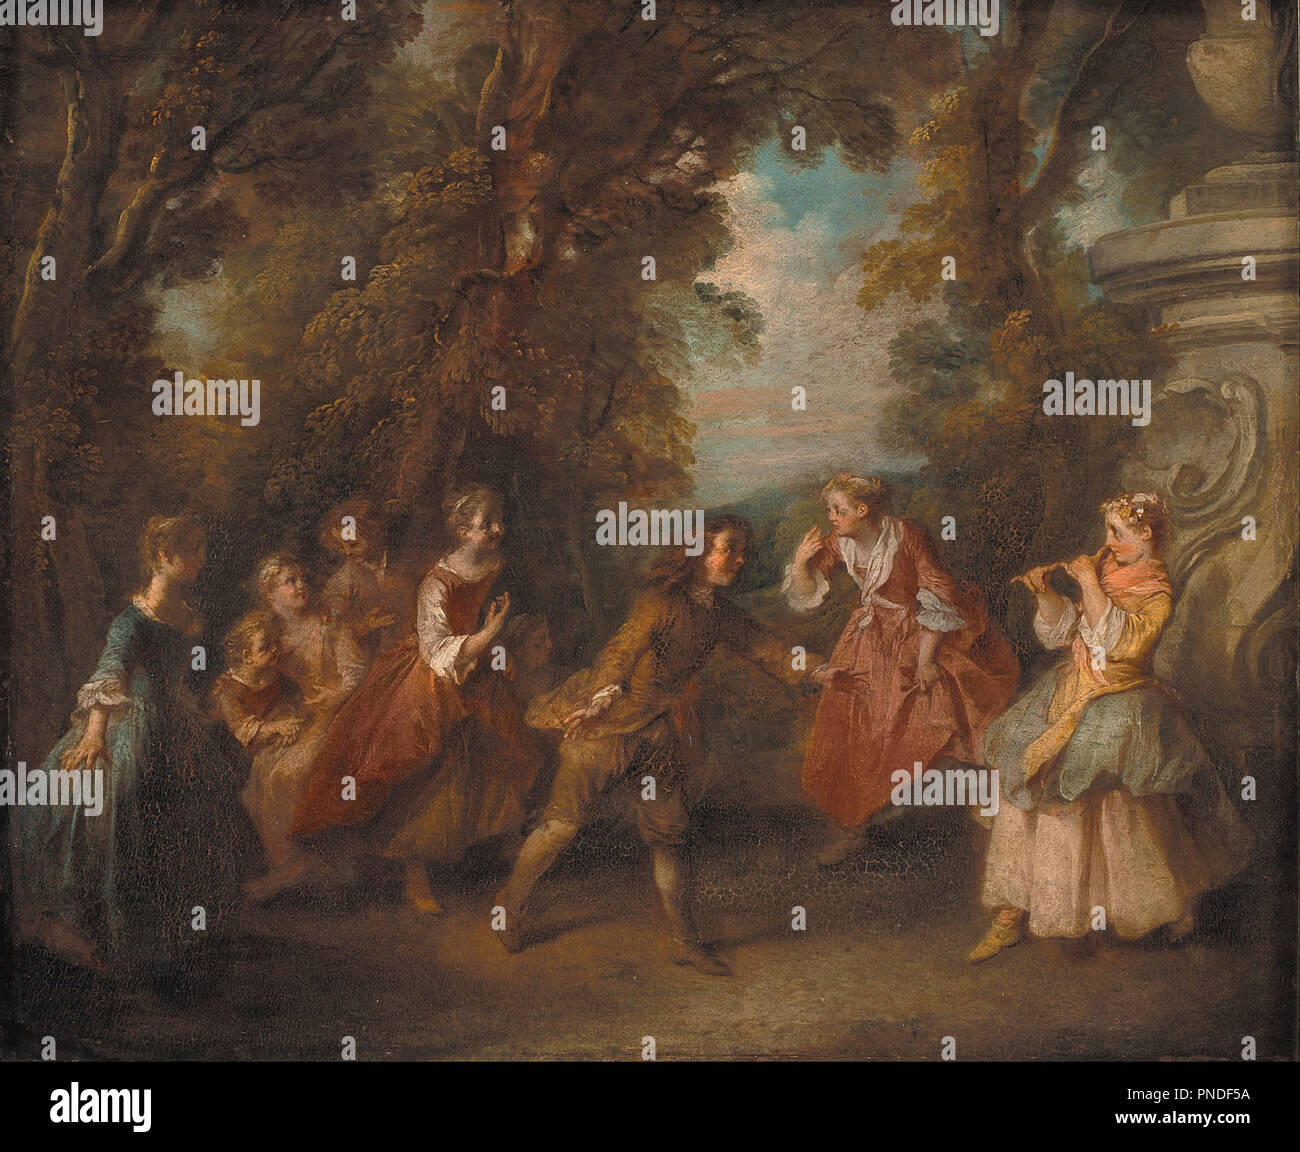 Children at Play in the Open. Date/Period: From 1705 until 1743. Painting. Oil on panel. Height: 270 mm (10.62 in); Width: 325 mm (12.79 in). Author: Nicolas Lancret. LANCRET, NICOLAS. Stock Photo